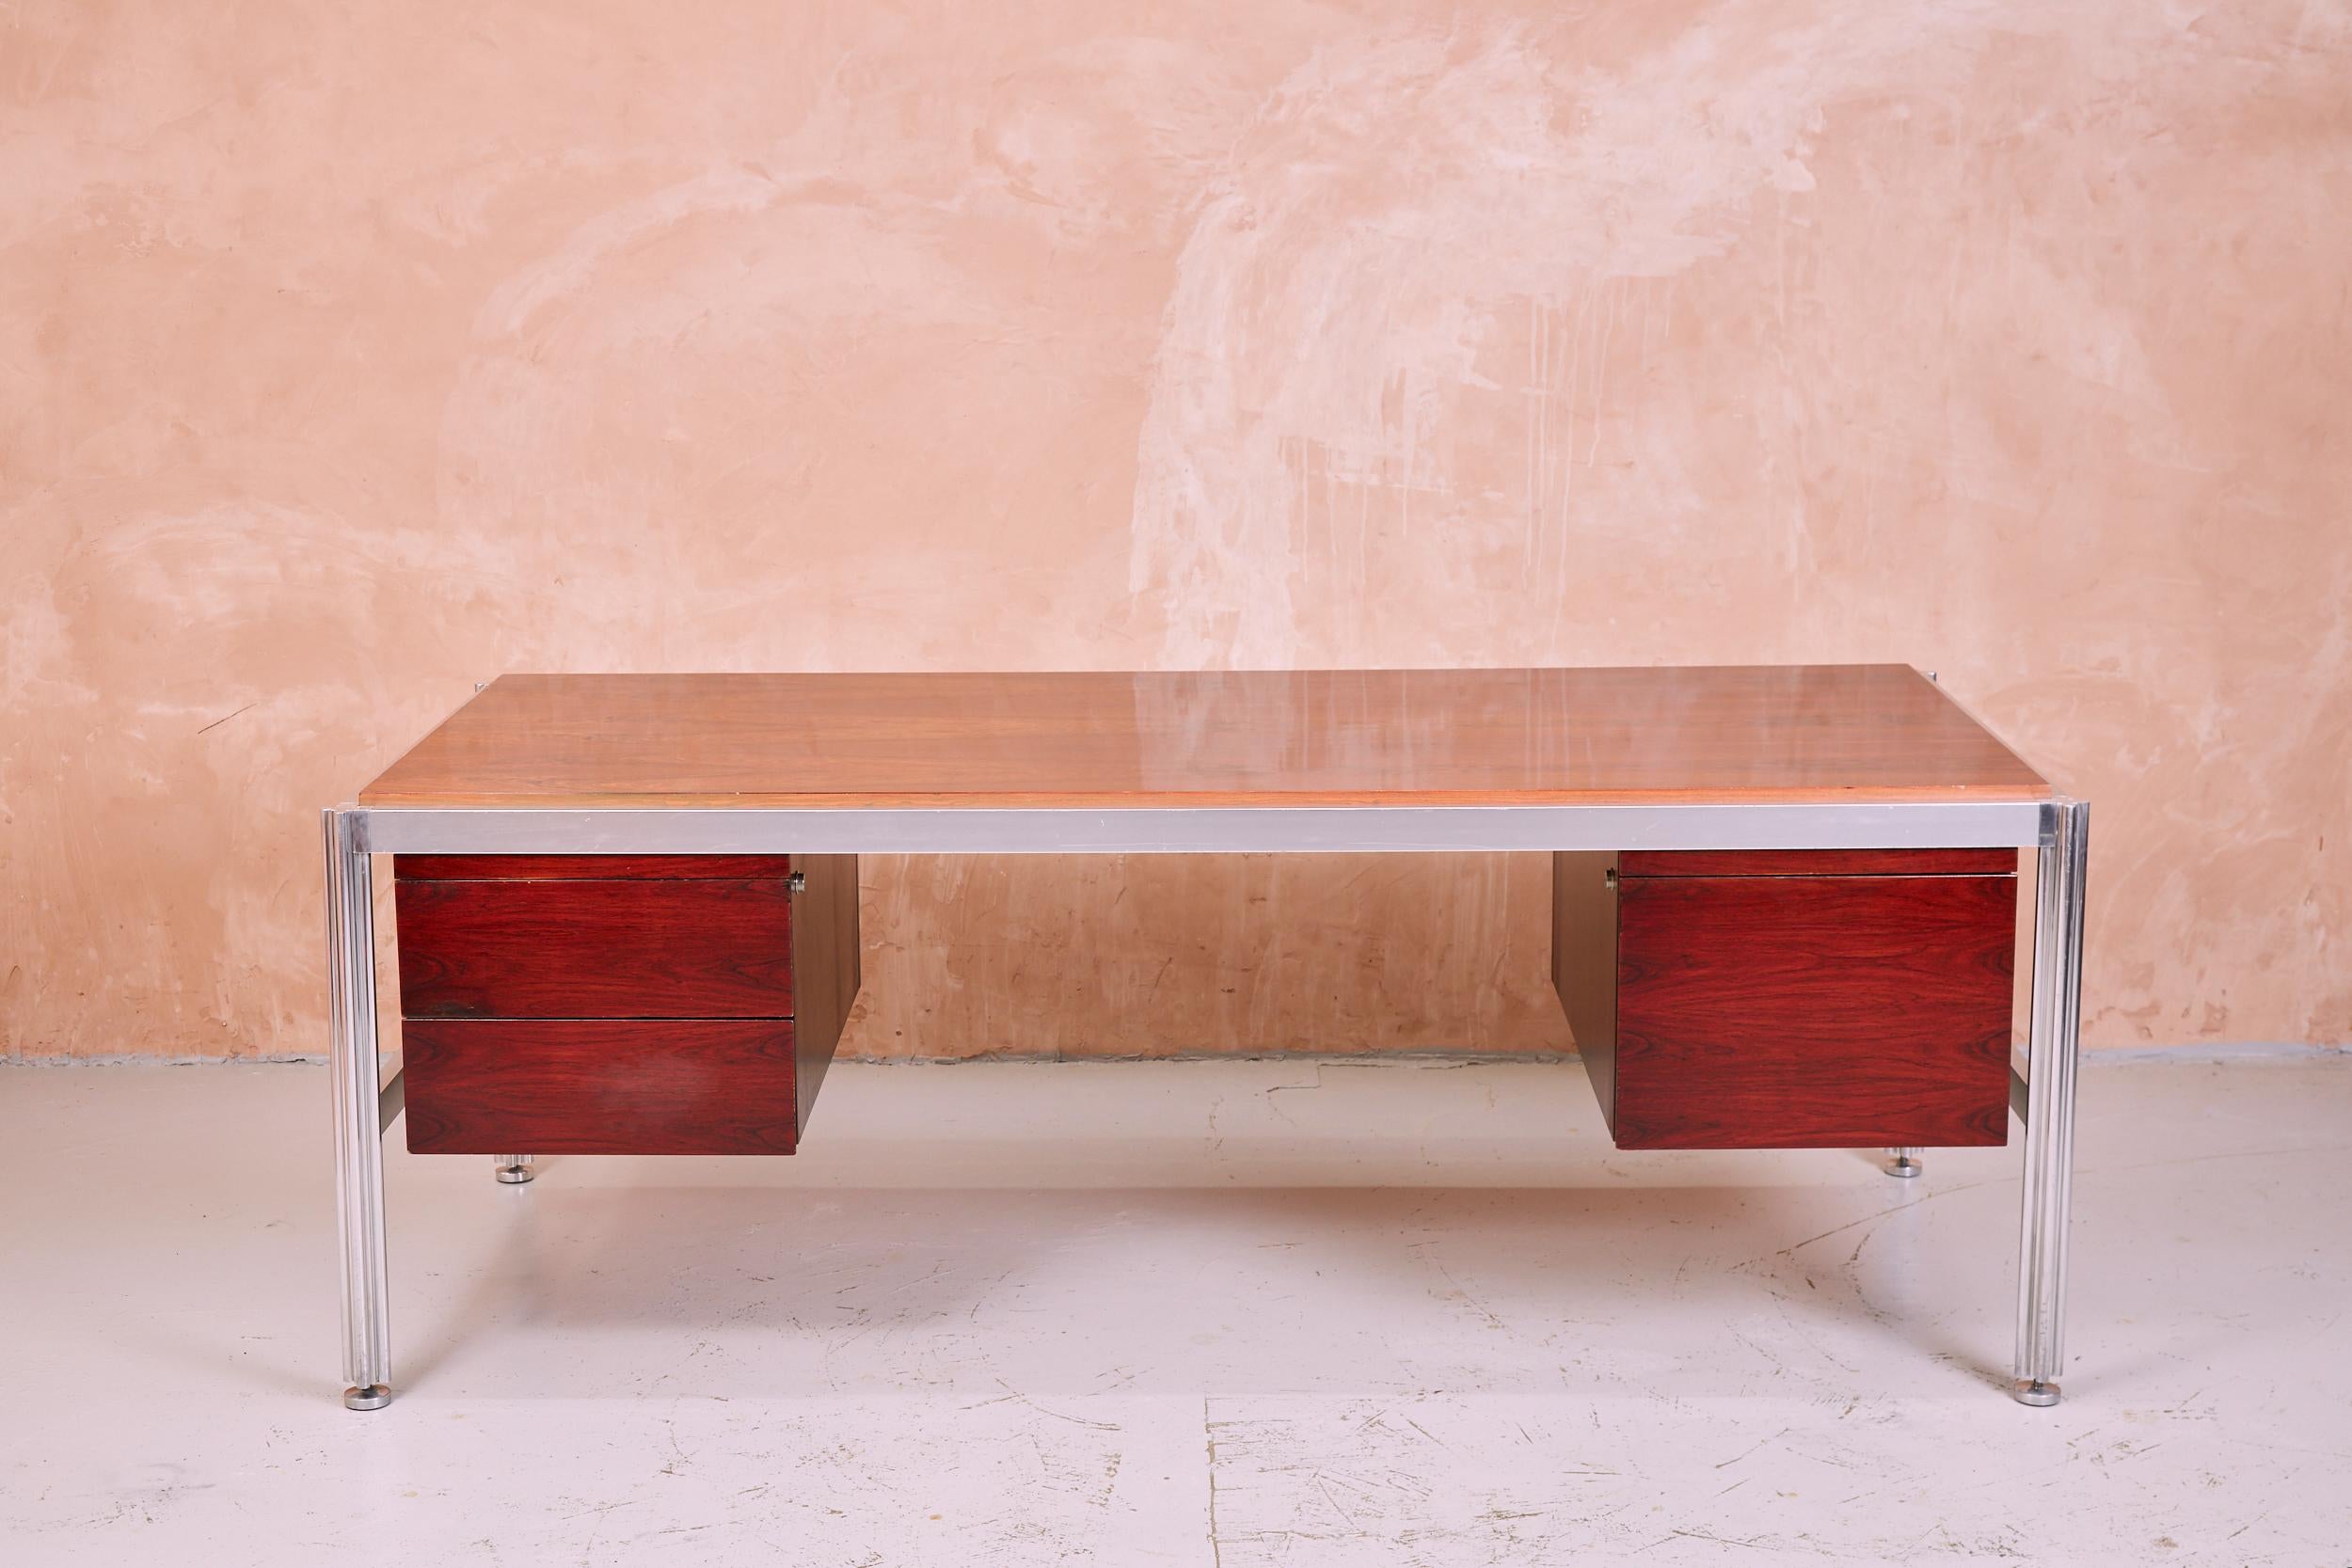 Designed by the Italian George Ciancimino and produced by French manufacturer Mobilier International in the 1970s. The desk is an impressive executive piece. A broad, gloss lacquered, rosewood top sits in an aluminium frame with ornate quatrefoil